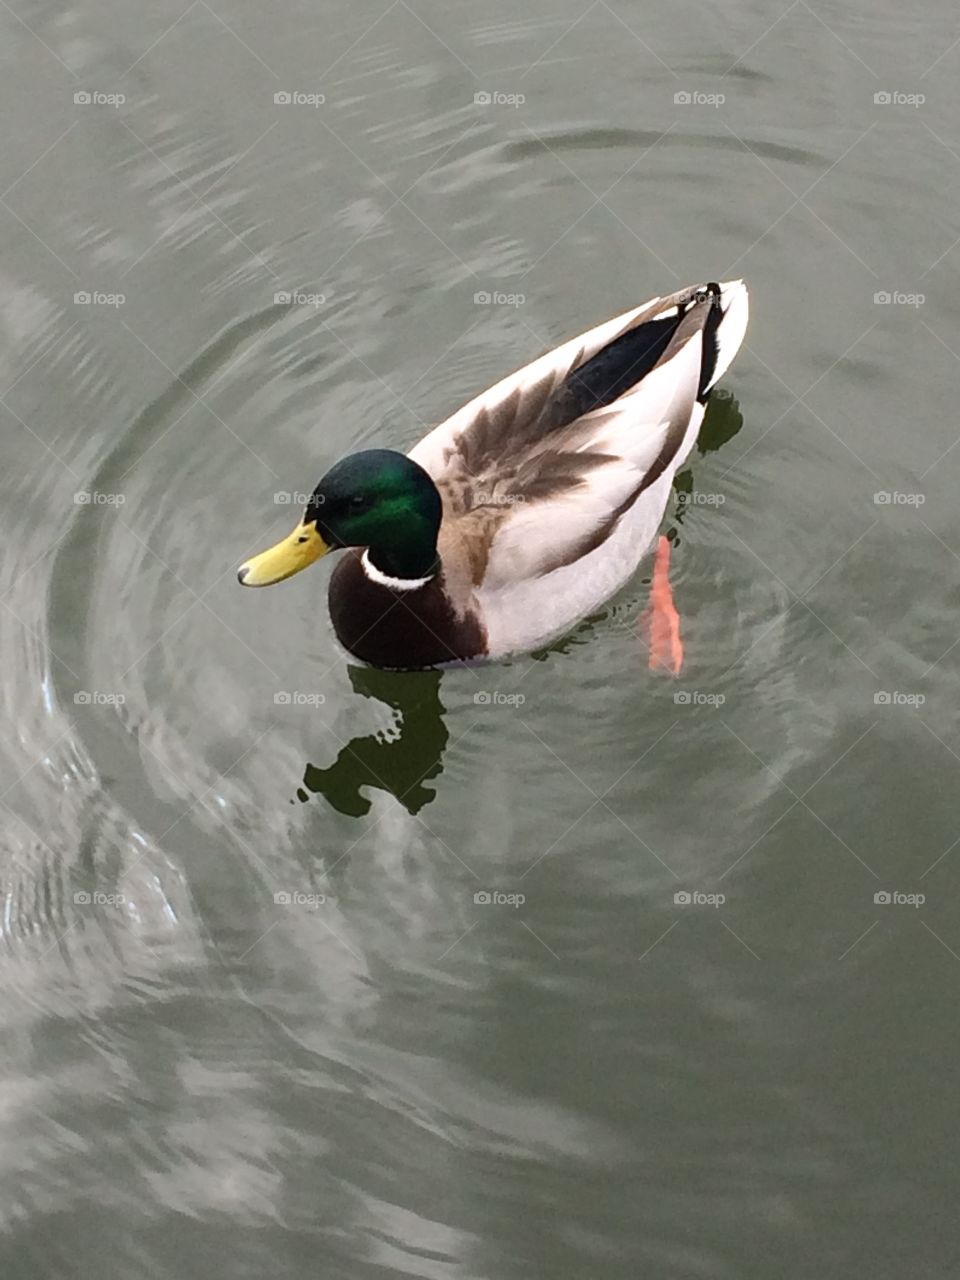 Duck with emerald green head swimming in river